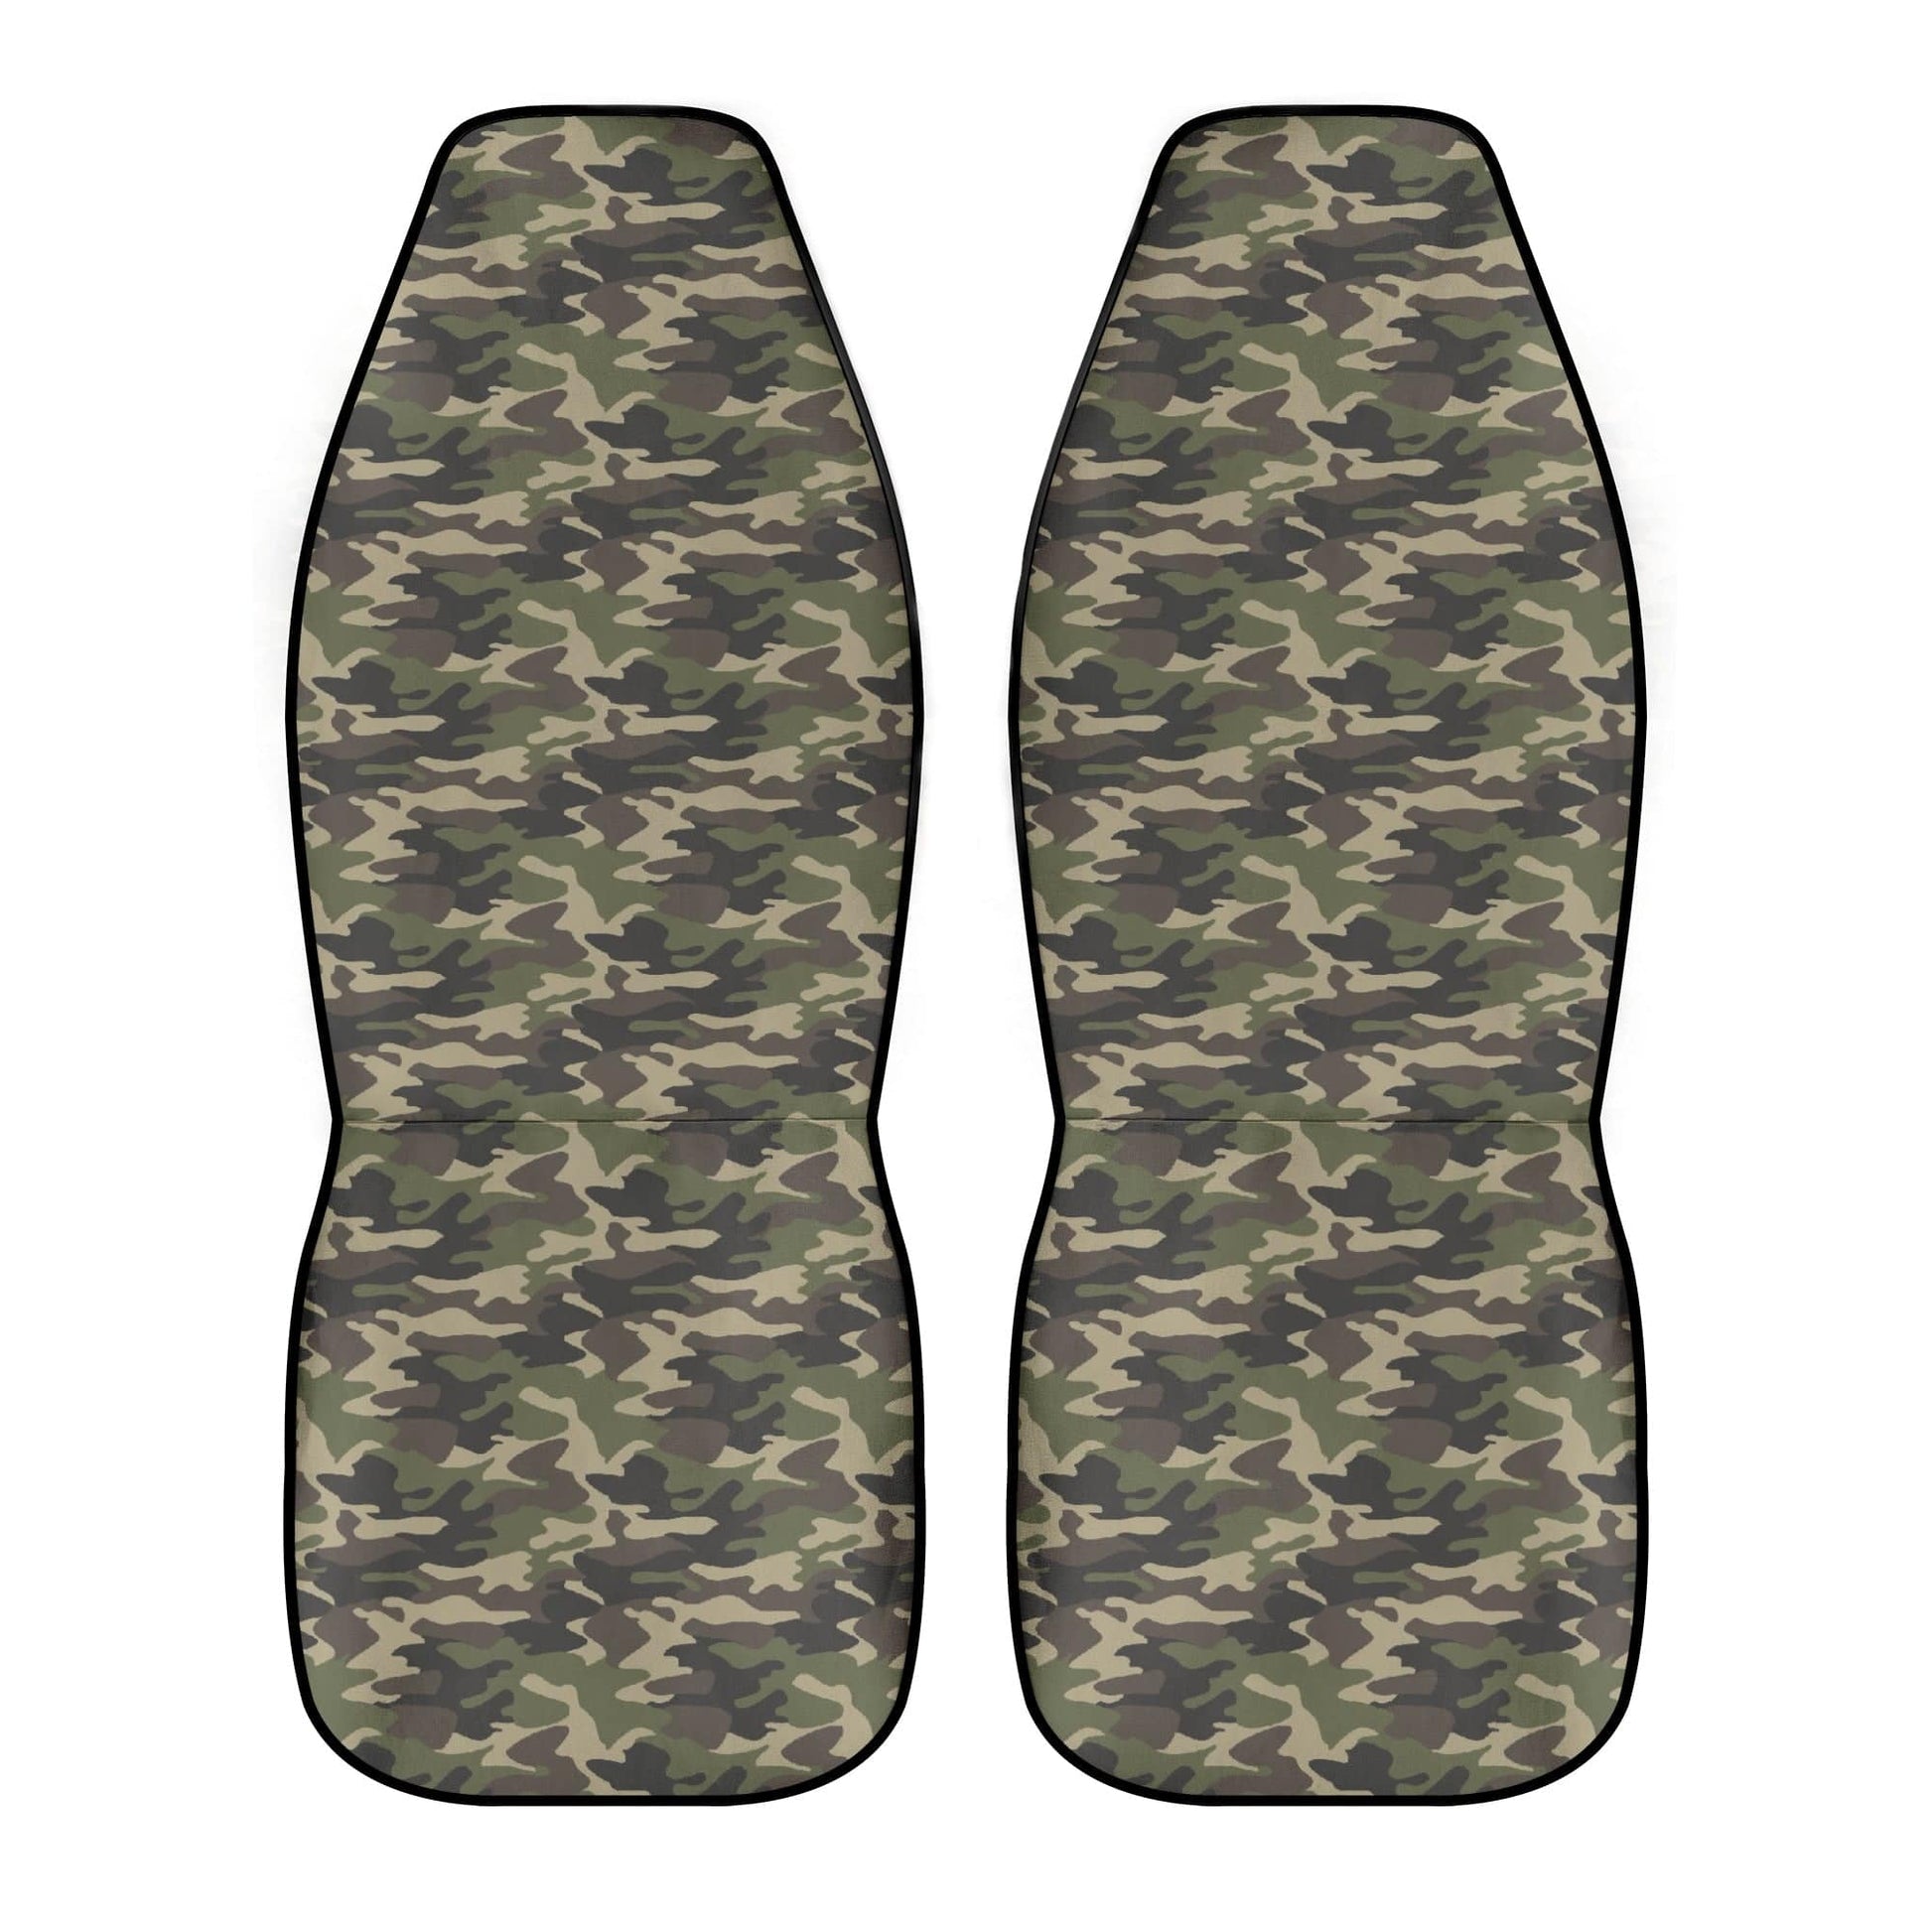 Camouflage Vehicle Front Bucket Seat Covers Automotive popcustoms   